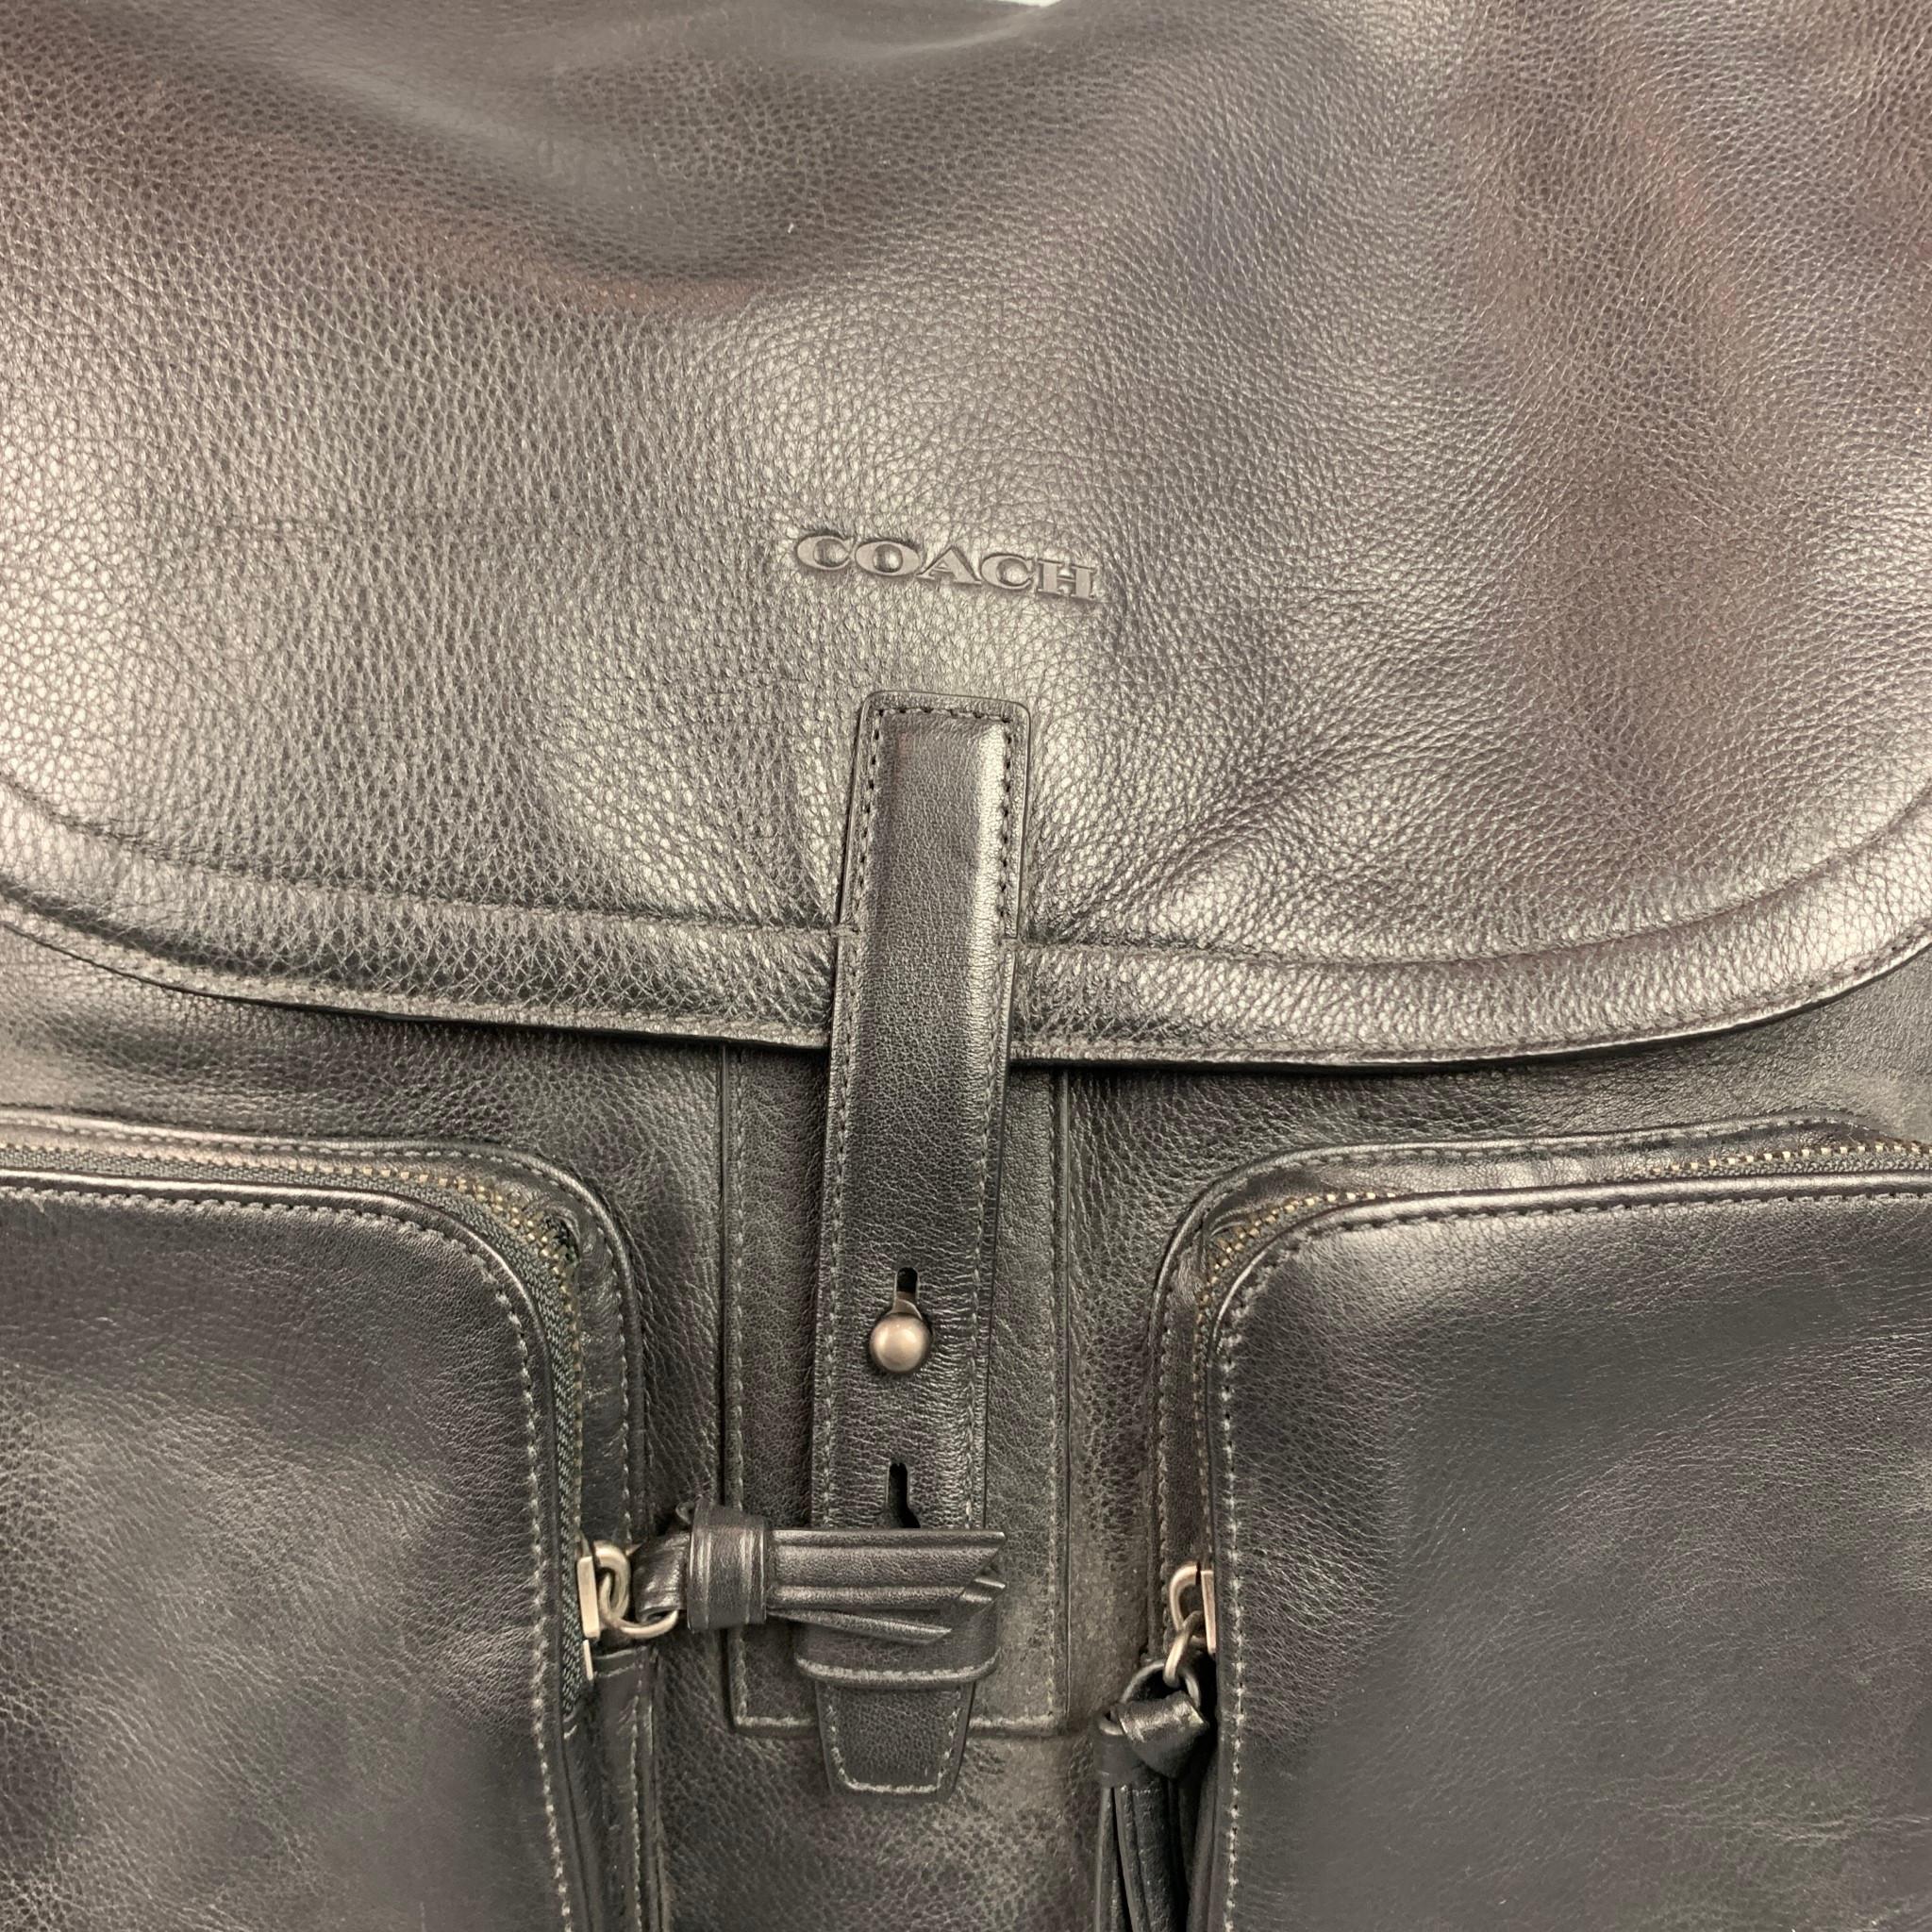 COACH backpack comes in a black leather featuring a top handle, umbrella strap, front pockets, logo tags, and inner pockets.

Very Good Pre-Owned Condition.

Measurements:

Length: 12.5 in.
Width: 4 in.
Height: 14 in.
Drop: 2.5 in. 